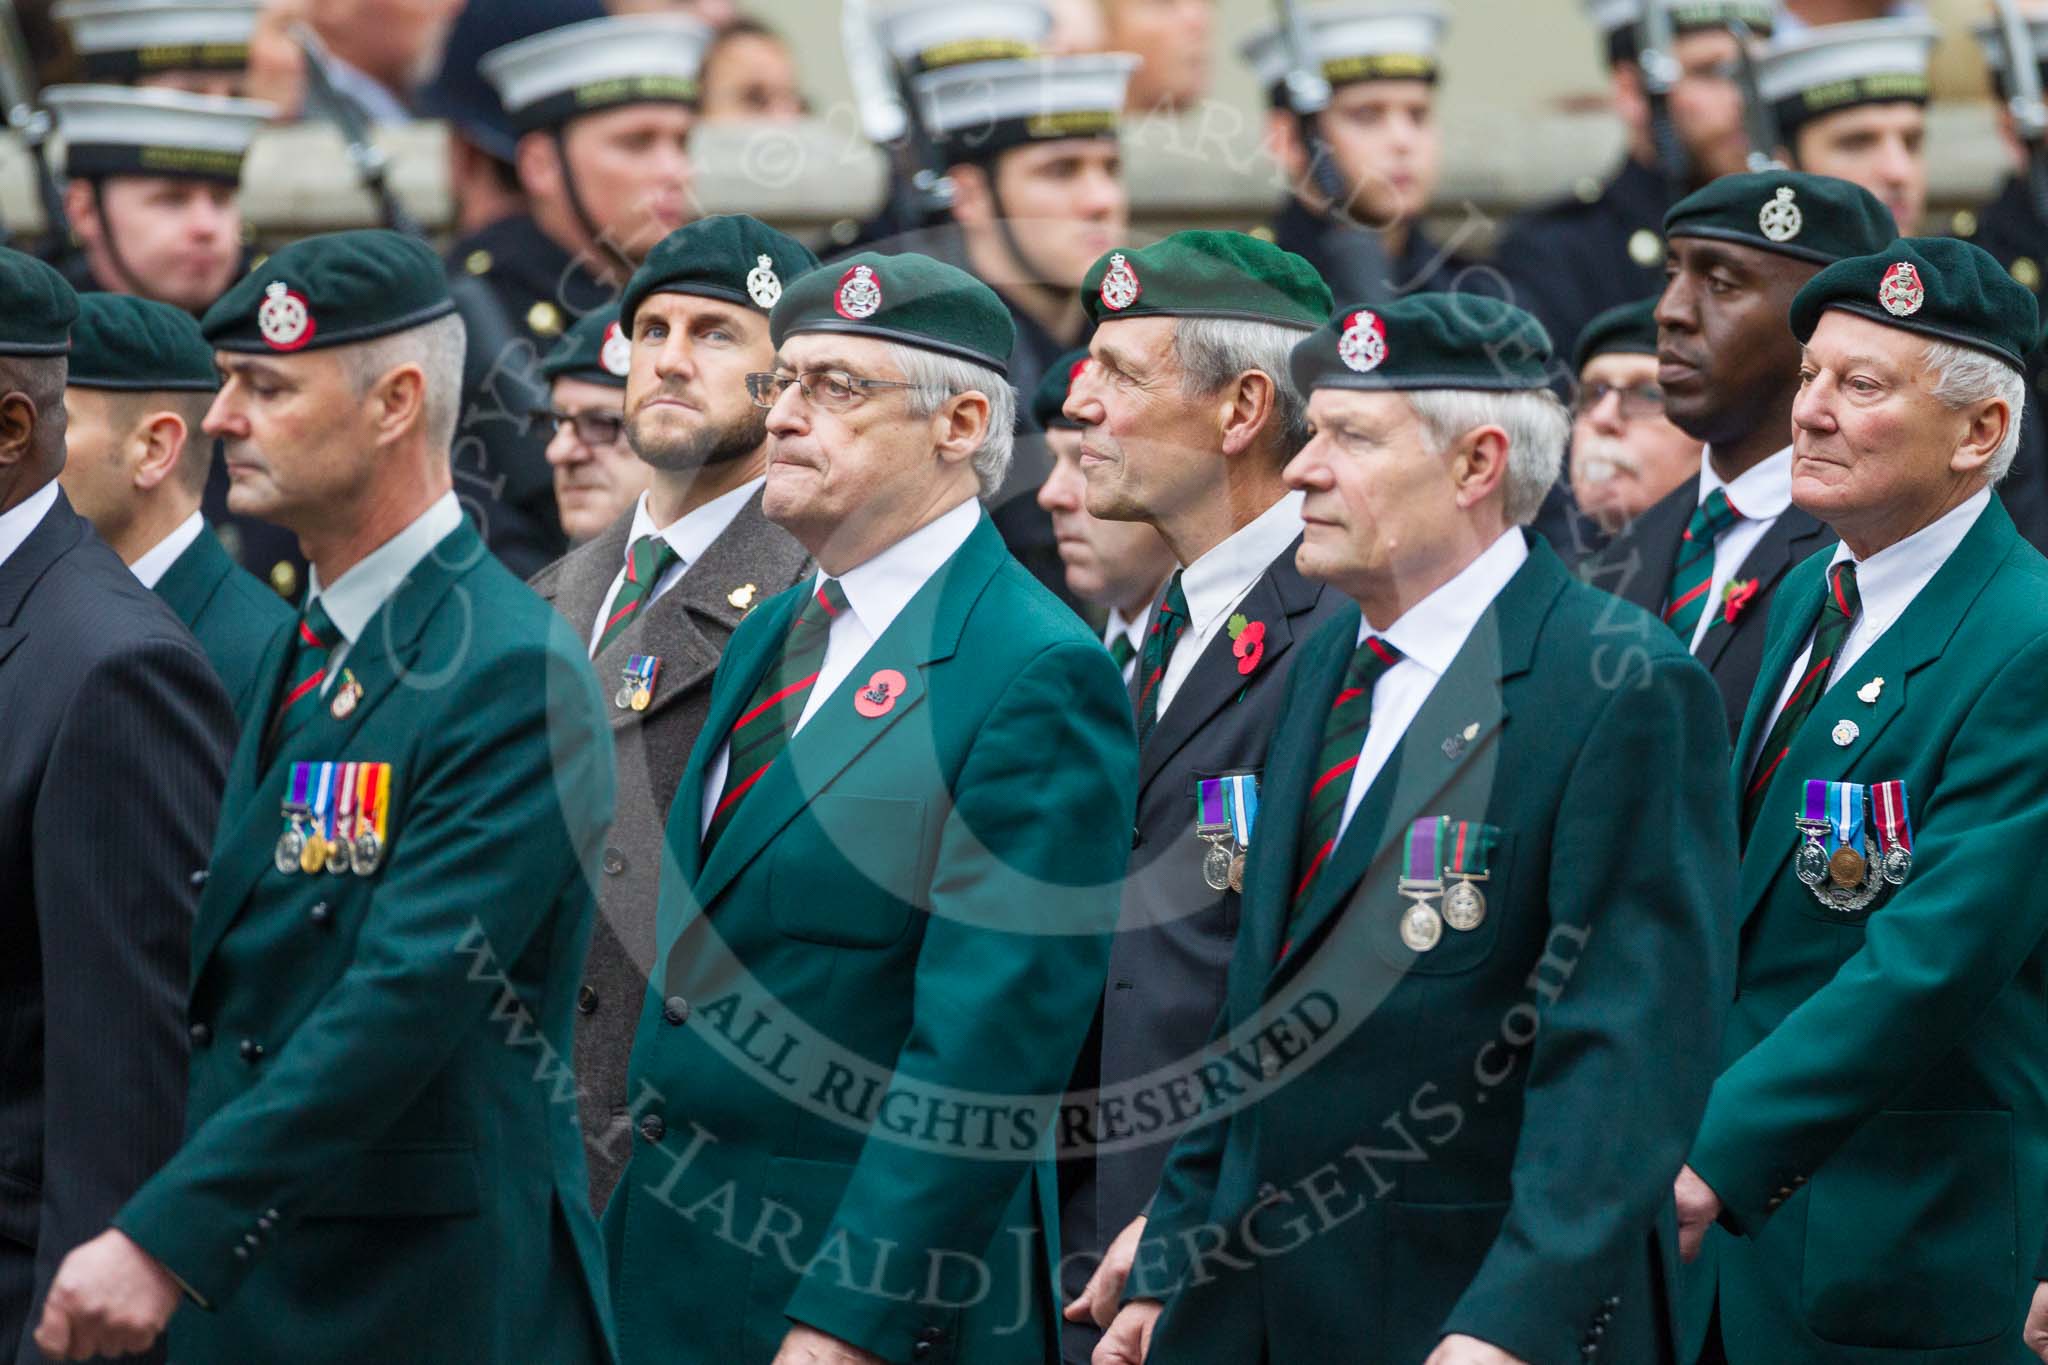 Remembrance Sunday at the Cenotaph 2015: Group A2, Royal Green Jackets Association.
Cenotaph, Whitehall, London SW1,
London,
Greater London,
United Kingdom,
on 08 November 2015 at 12:08, image #1166